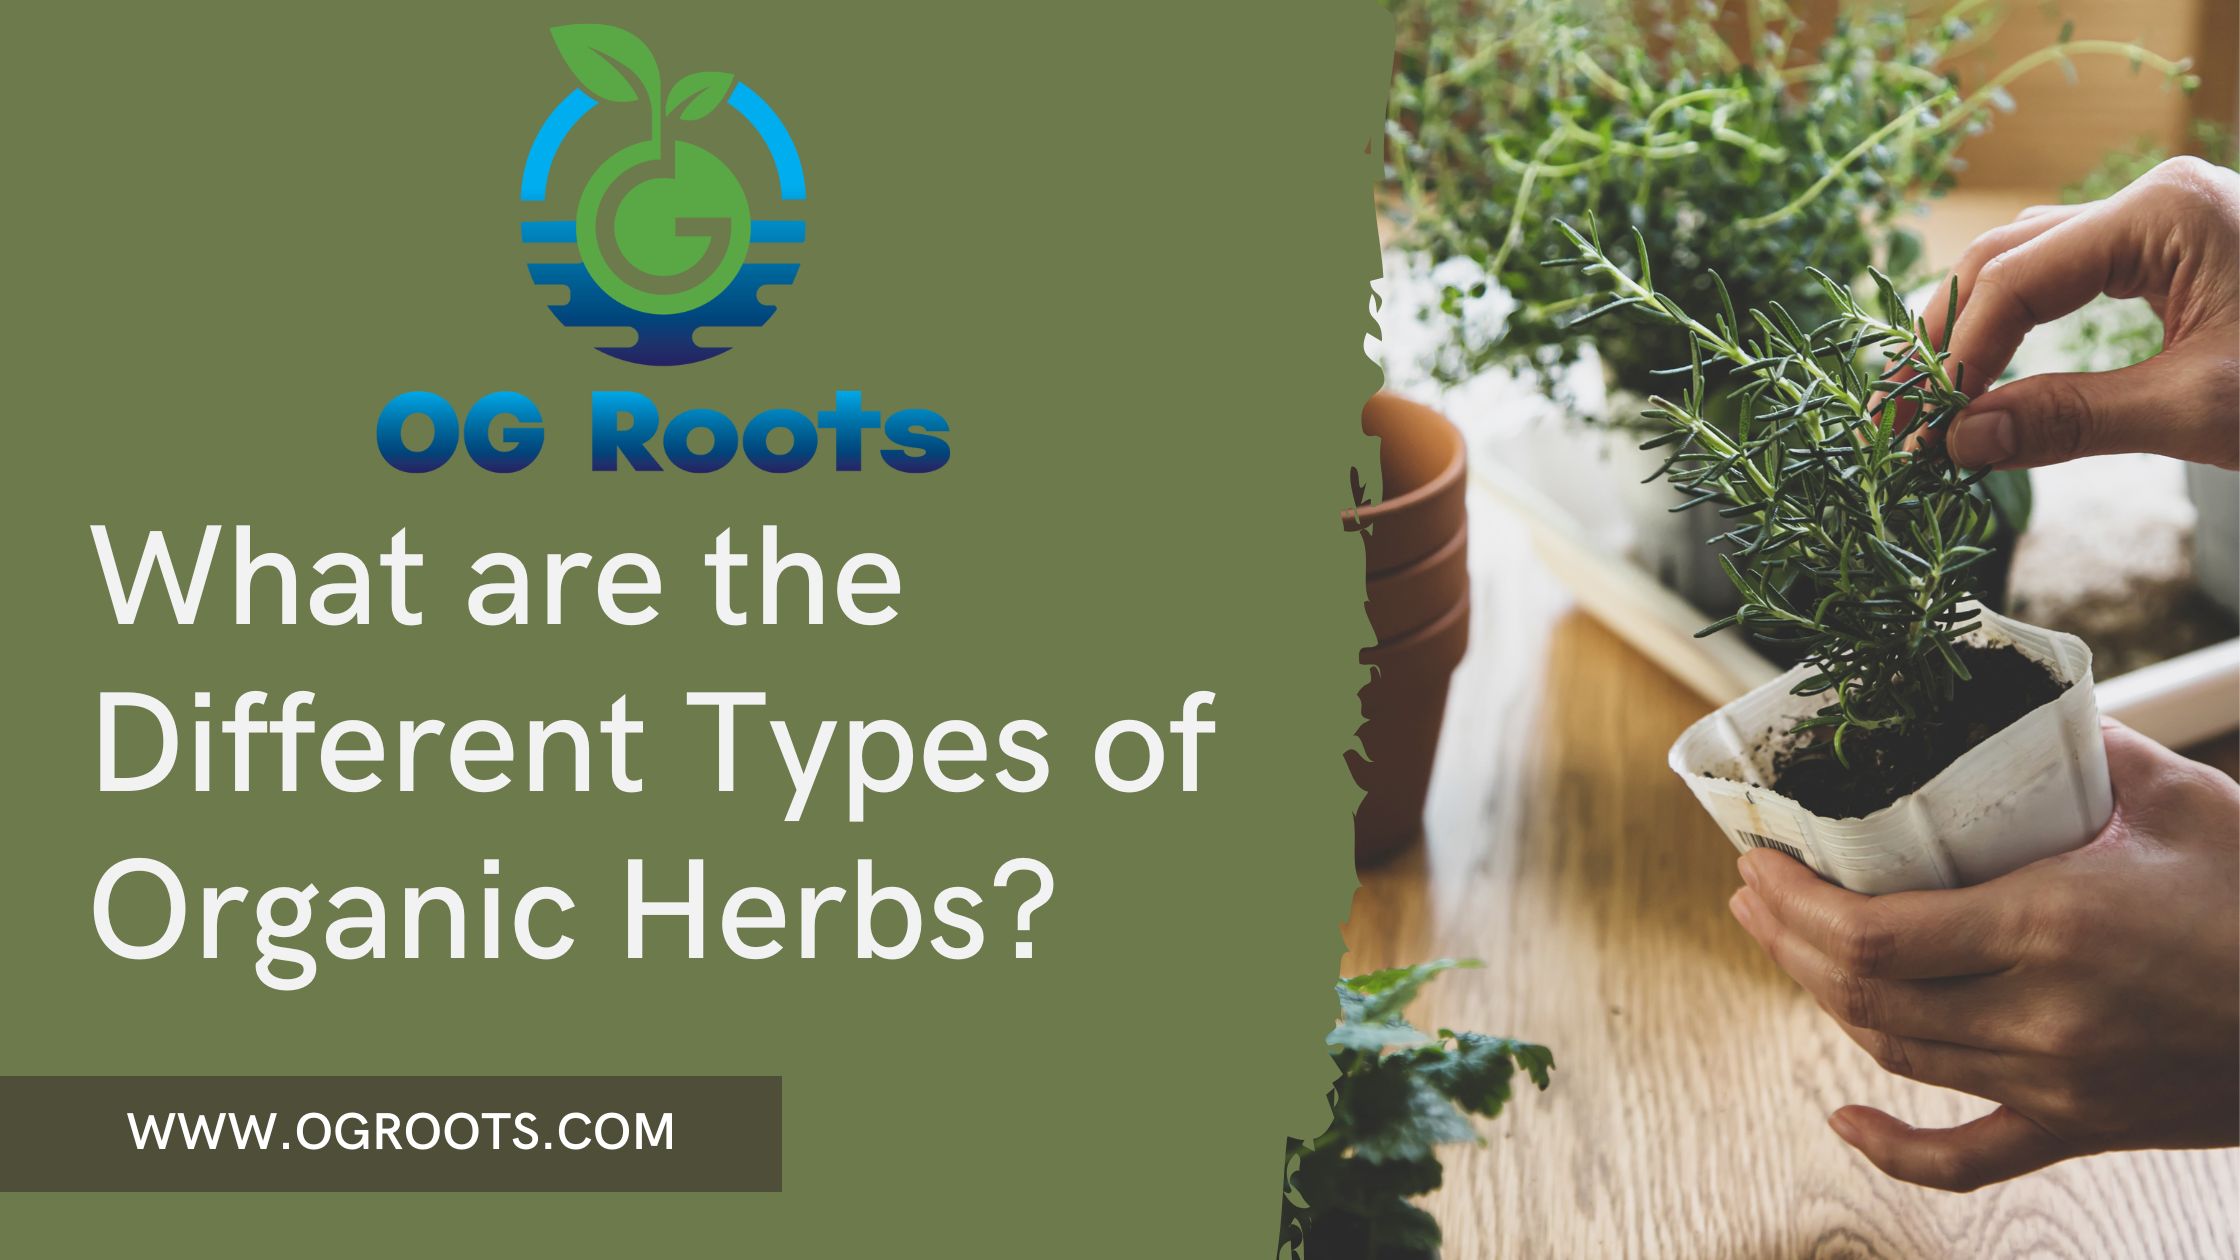 What are the Different Types of Organic Herbs